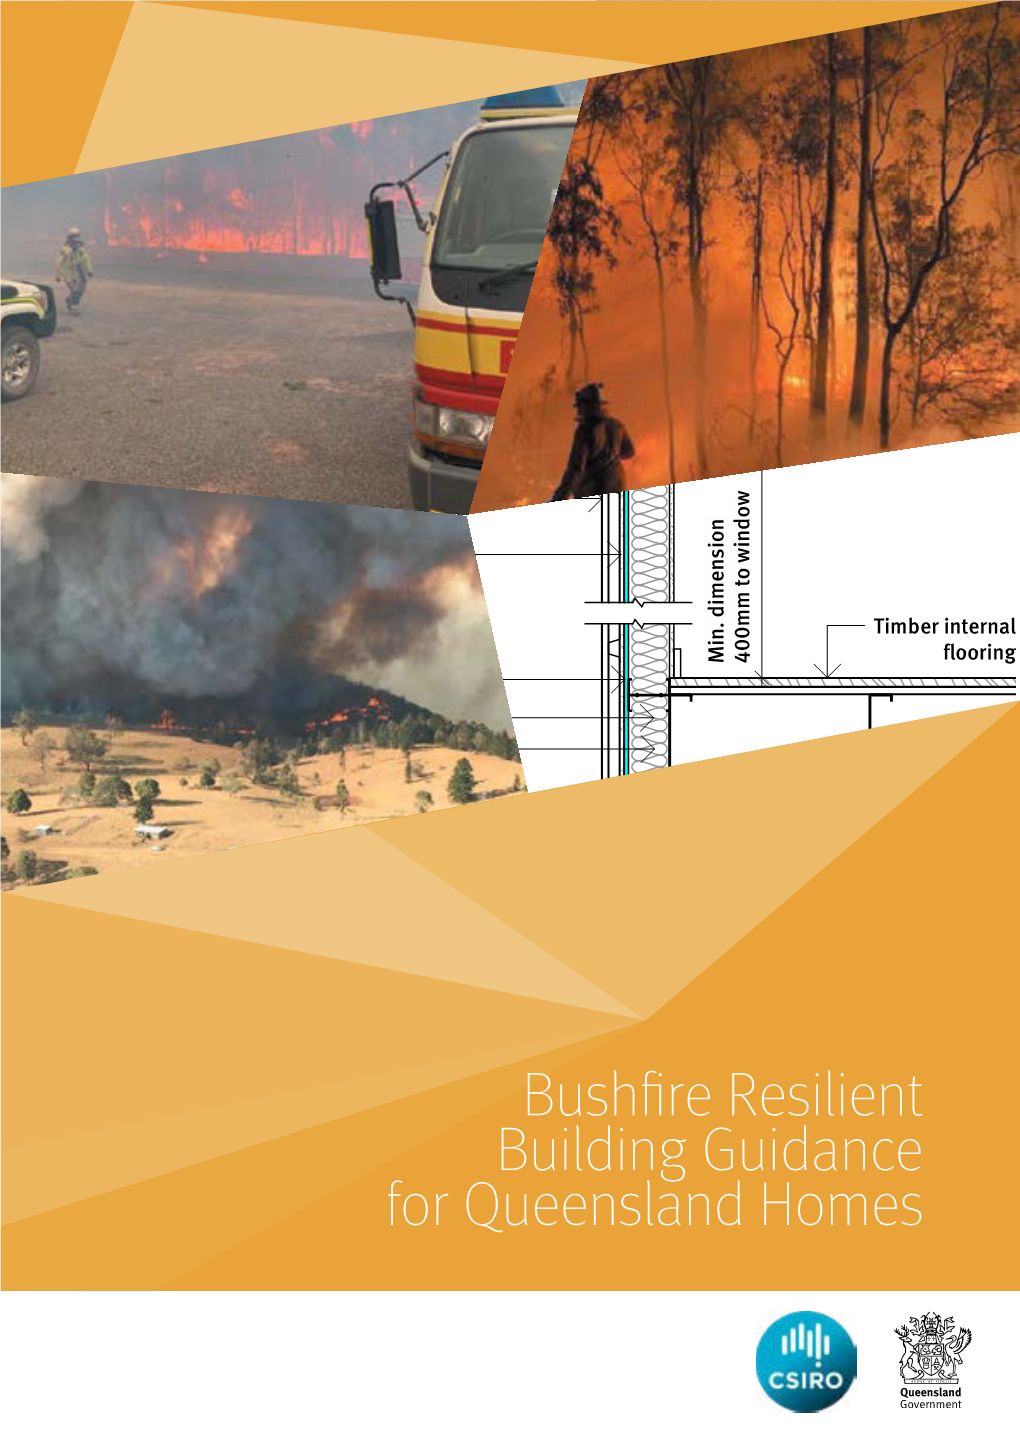 Bushfire Resilient Building Guidance for Queensland Homes